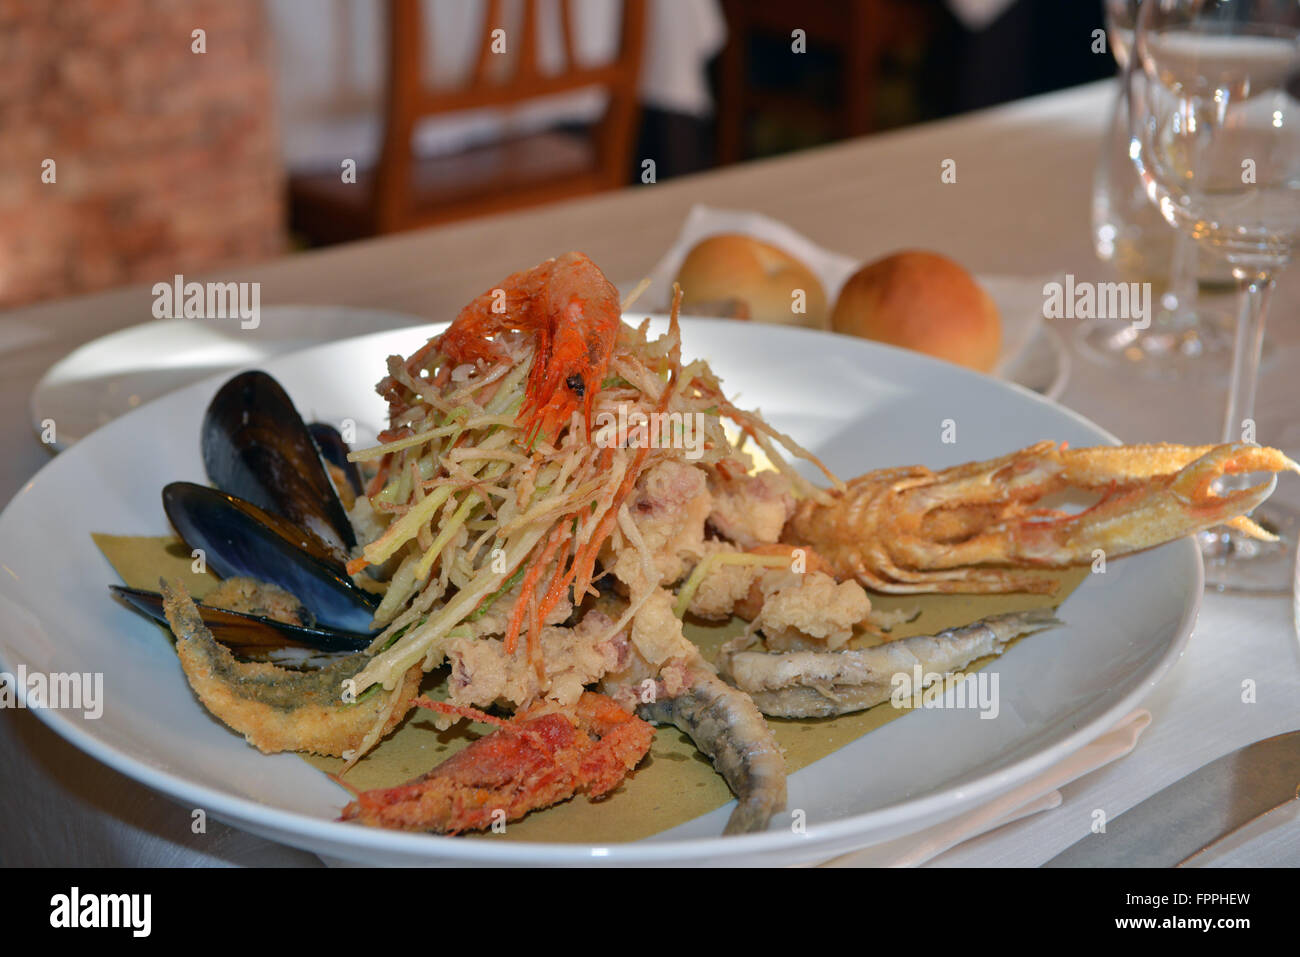 hi-res fish photography stock misto Alamy Fritto seafood and - images platter and